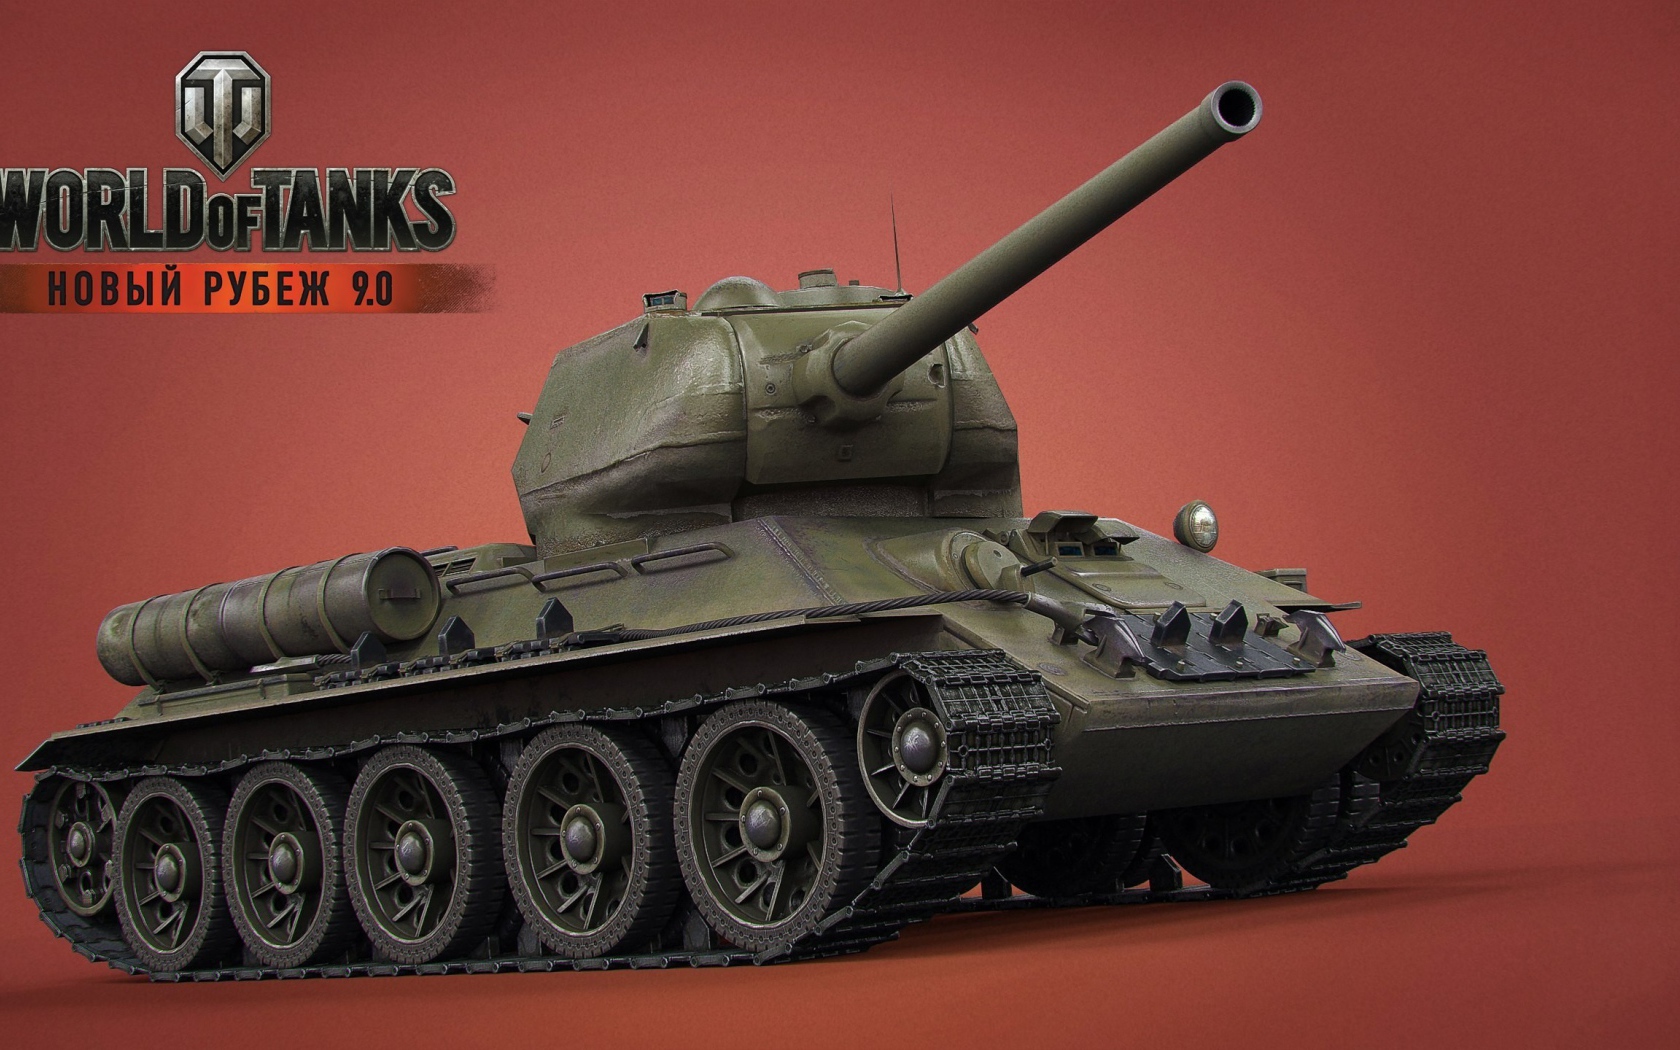 The game World of Tanks, T-34 tank